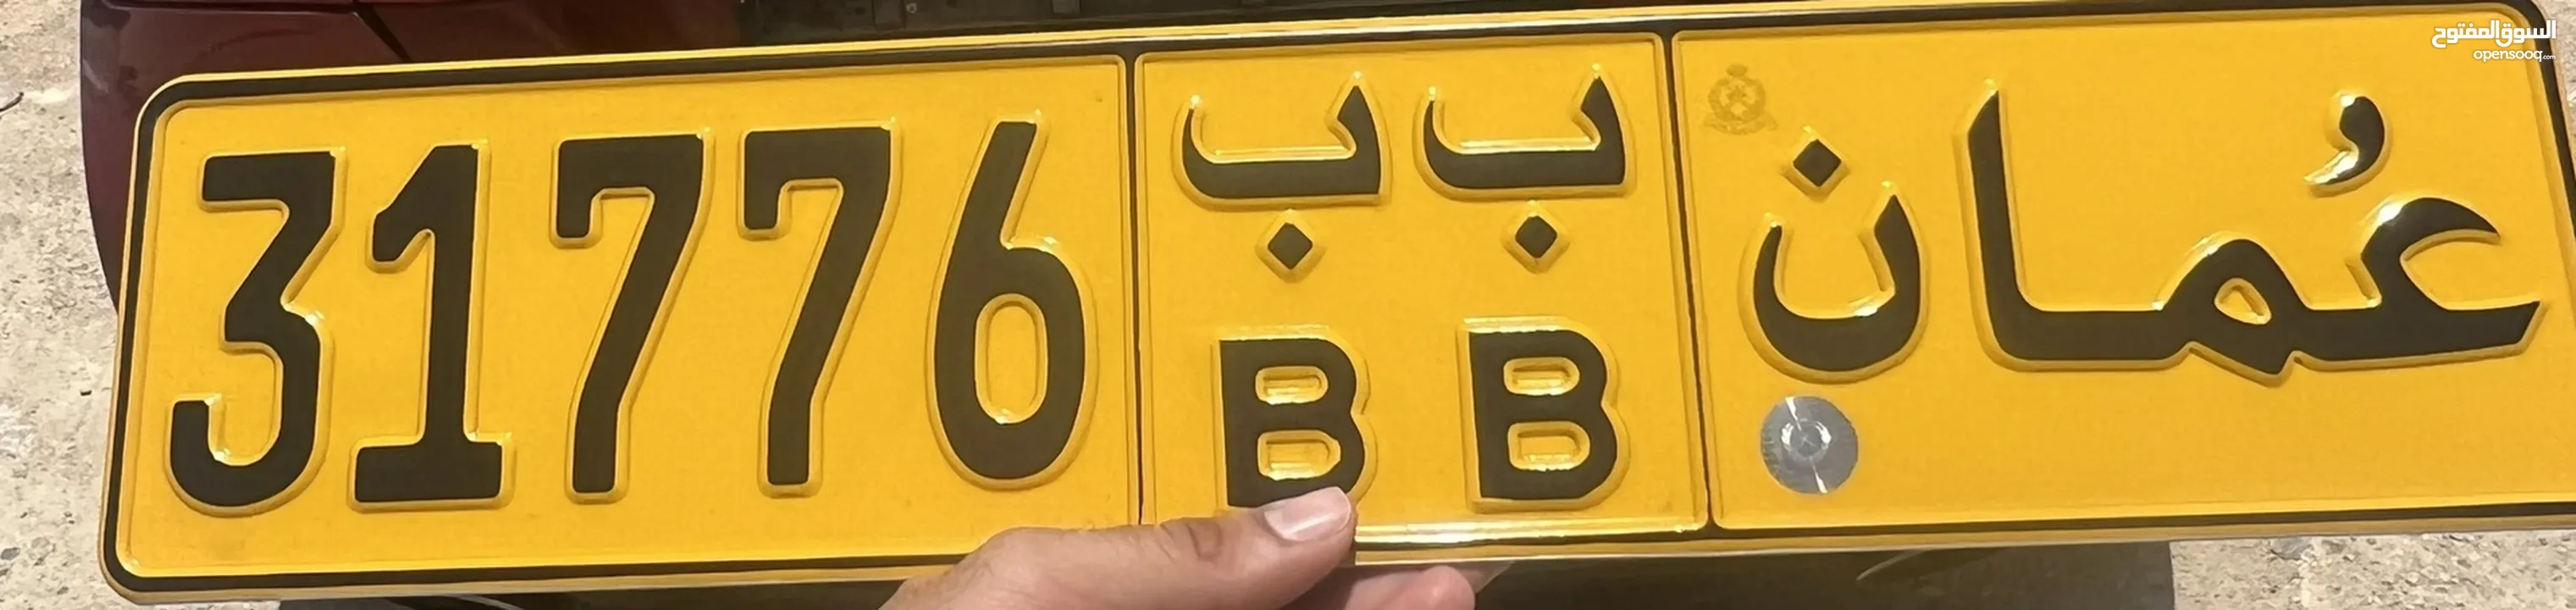 Number Plate for sale